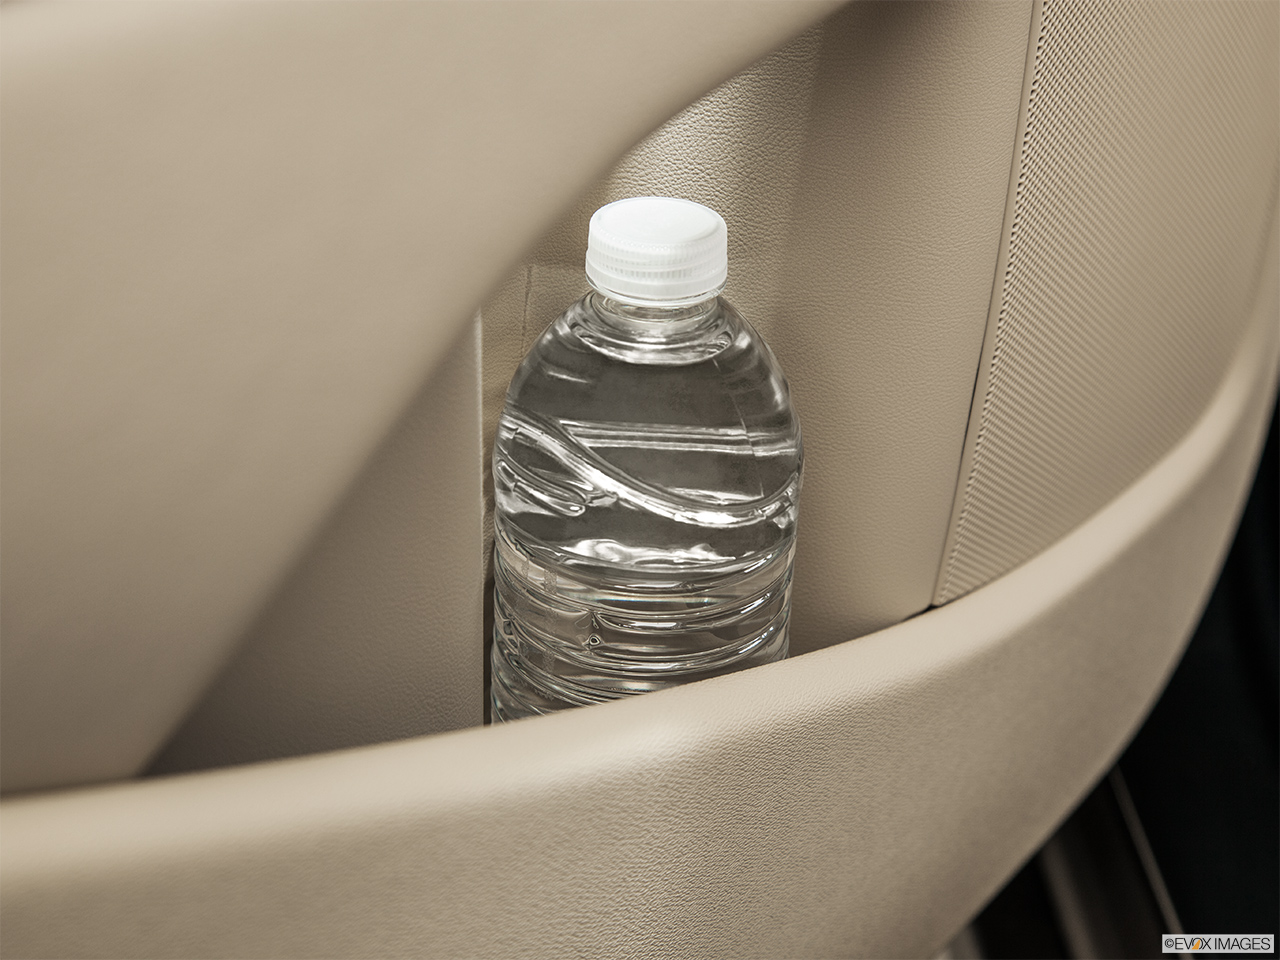 2015 Volvo XC70 Premier Plus Second row side cup holder with coffee prop, or second row door cup holder with water bottle. 